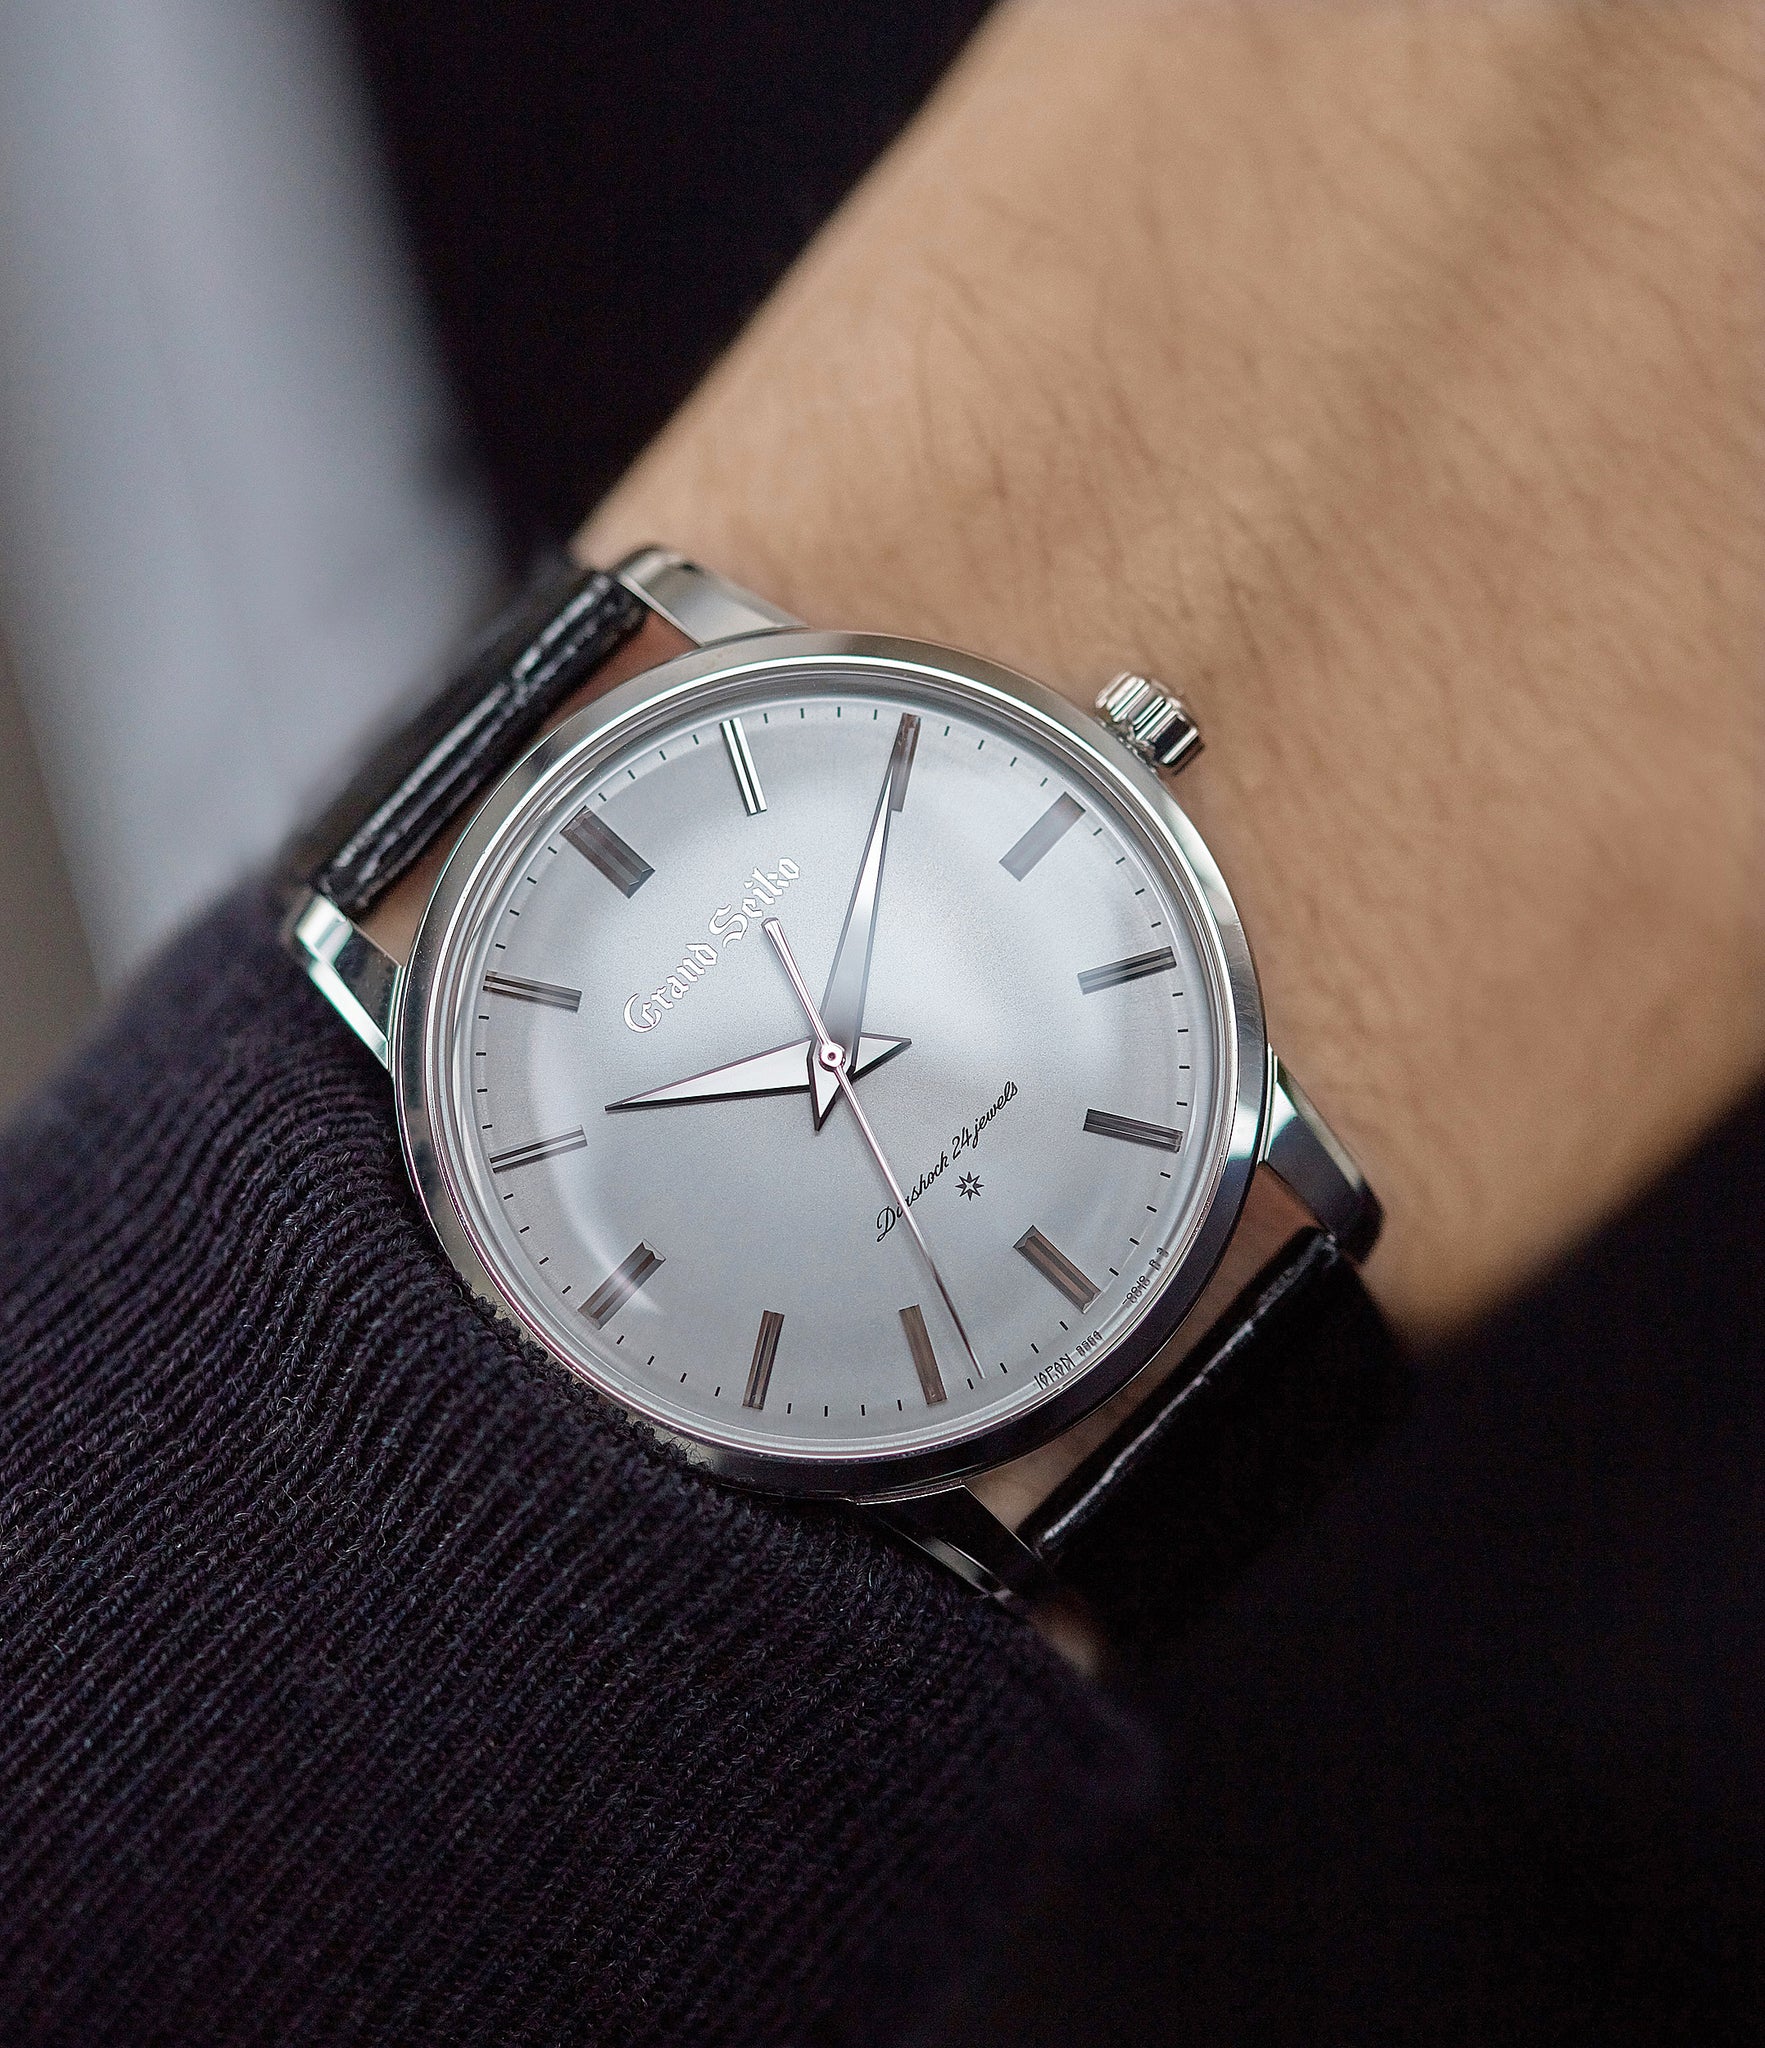 men's luxury dress watch Grand Seiko SBGW251 limited edition platinum time-only dress watch Japanese-made full set at A Collected Man London UK specialist of rare watches